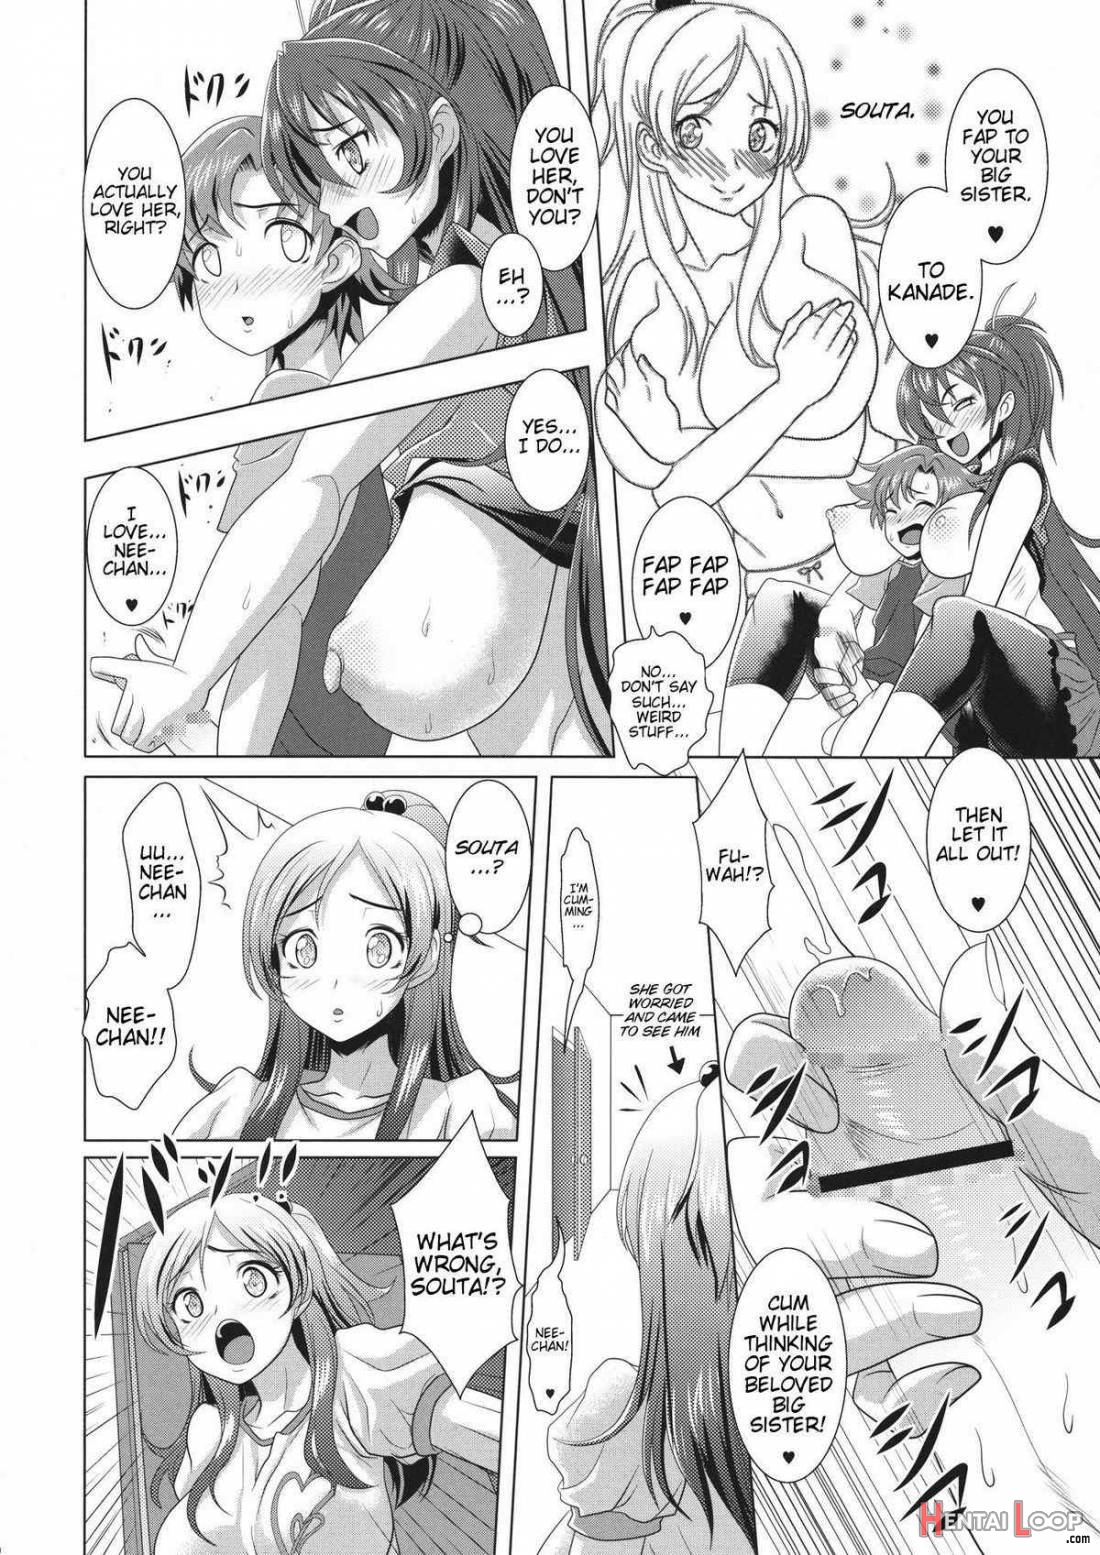 Suite Oppai page 9